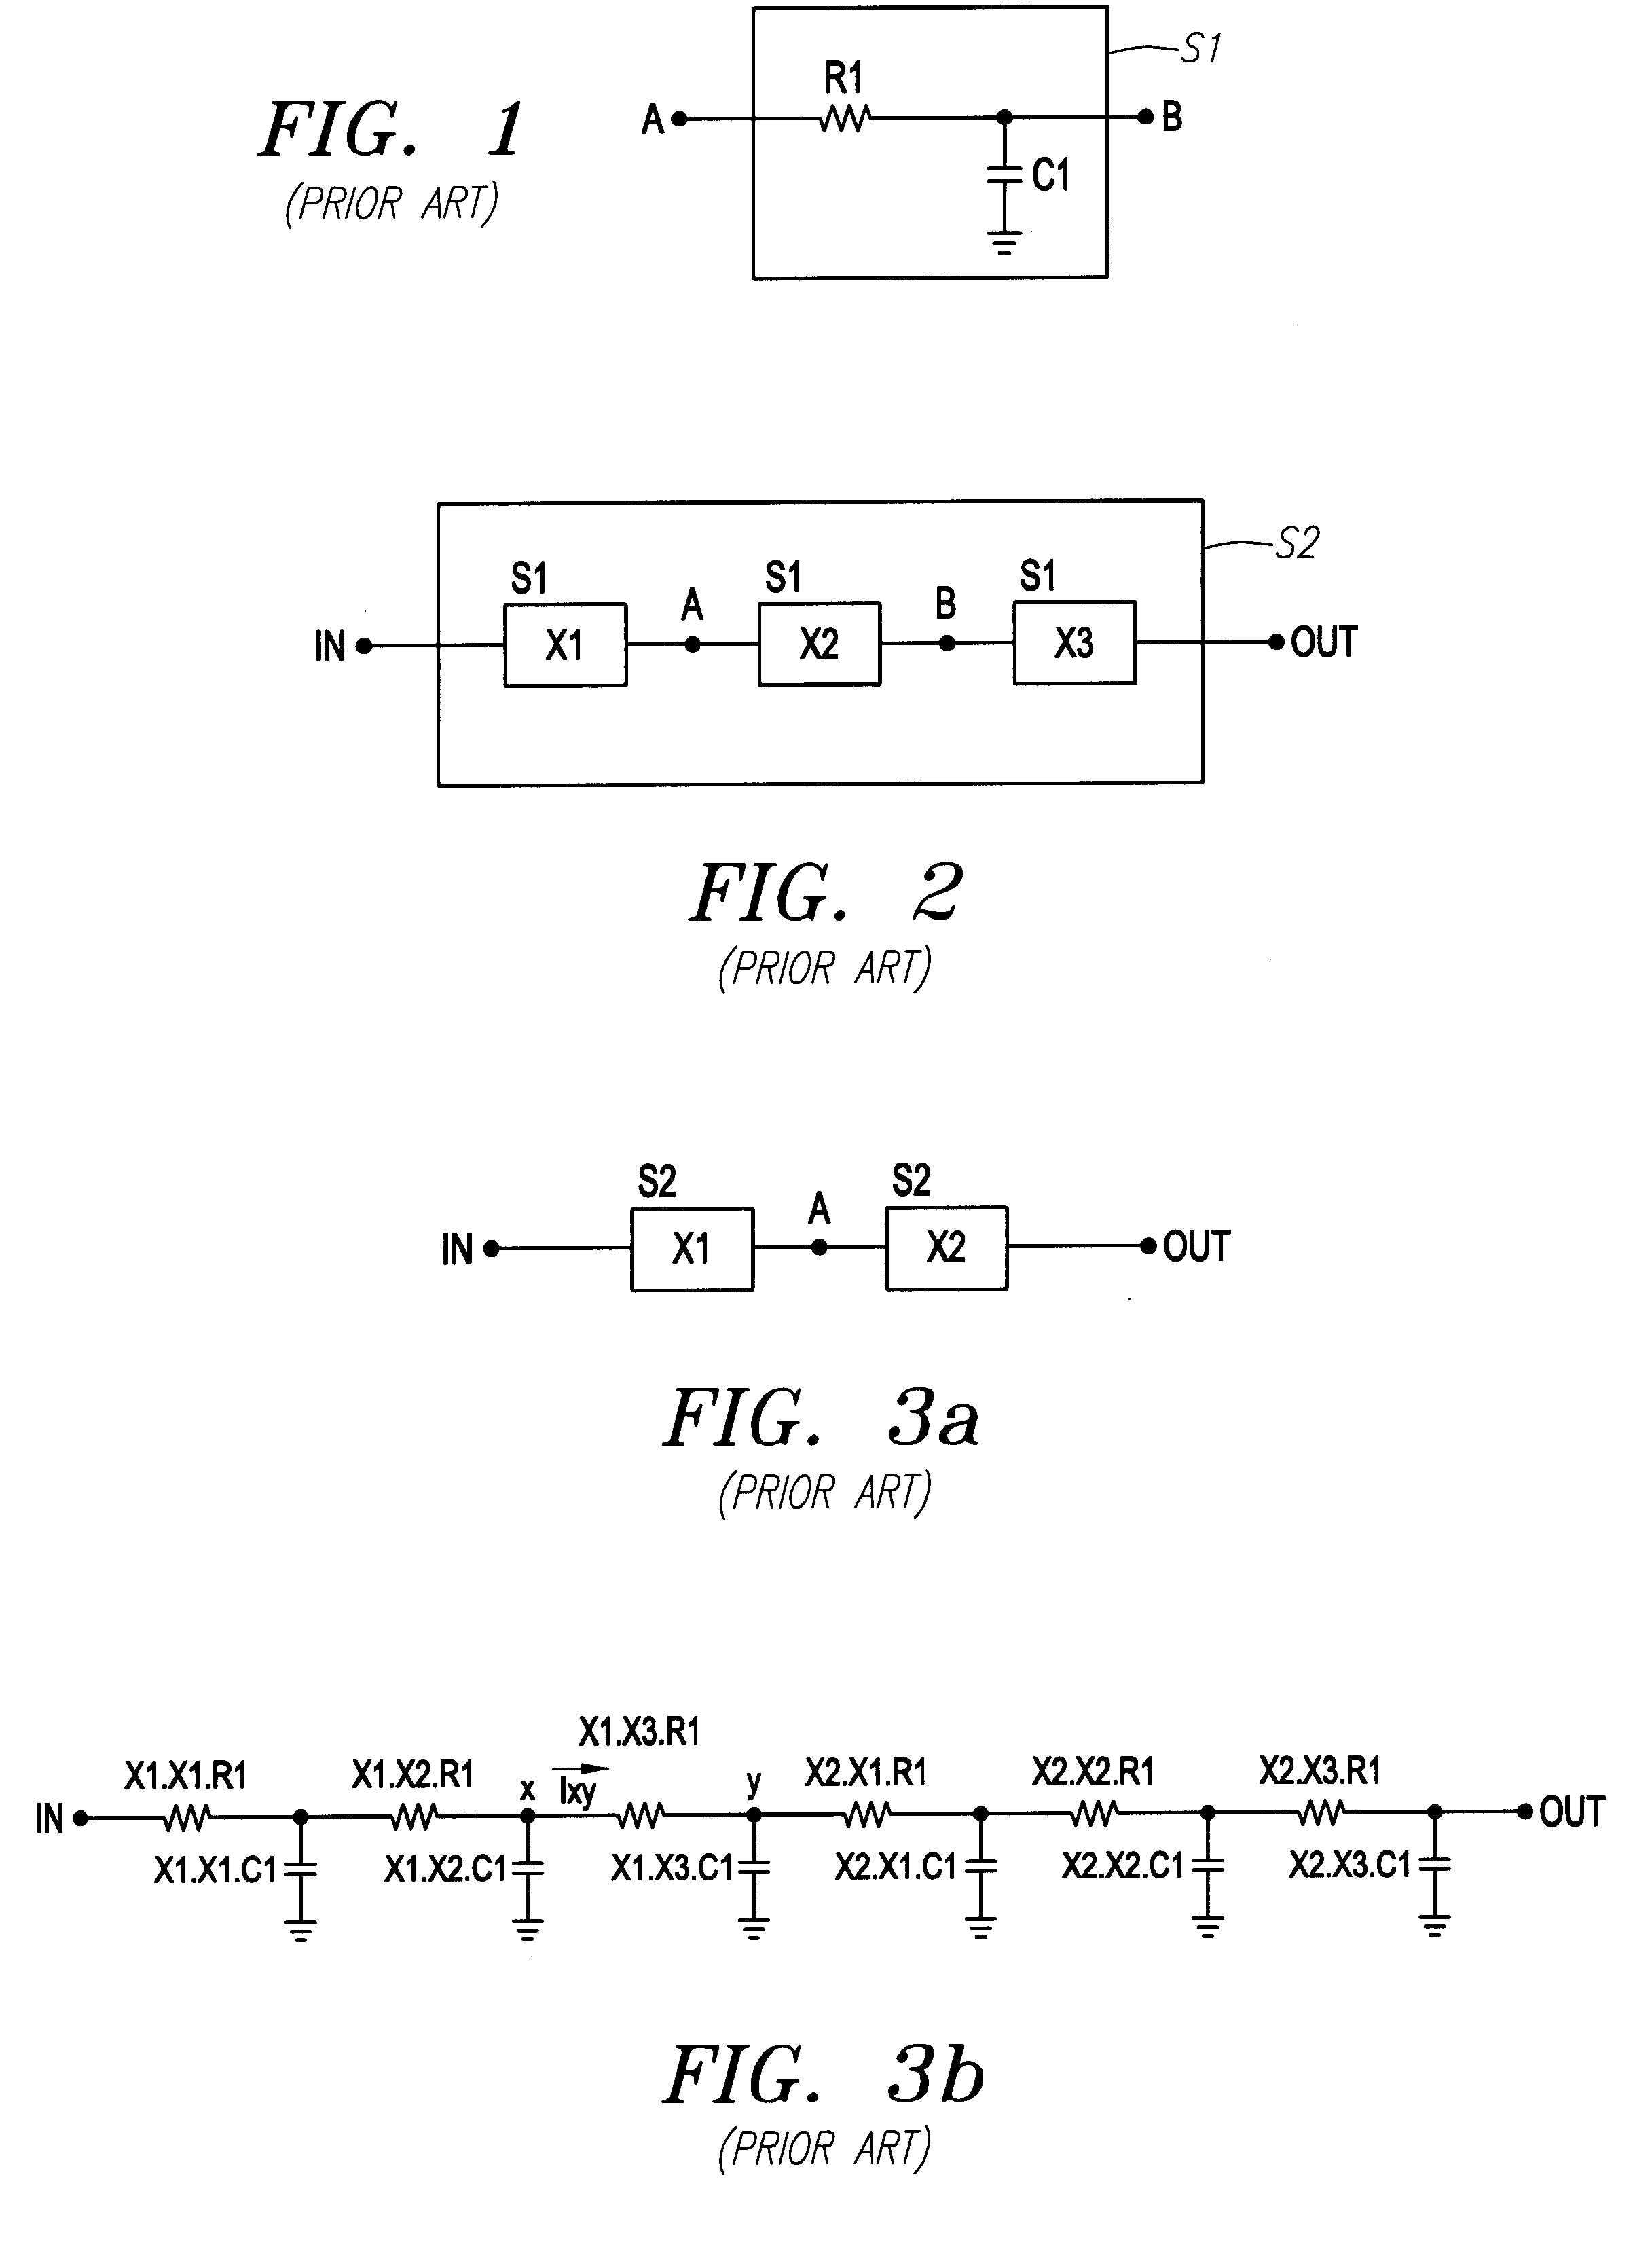 System and method for simulating circuits using inline subcircuits